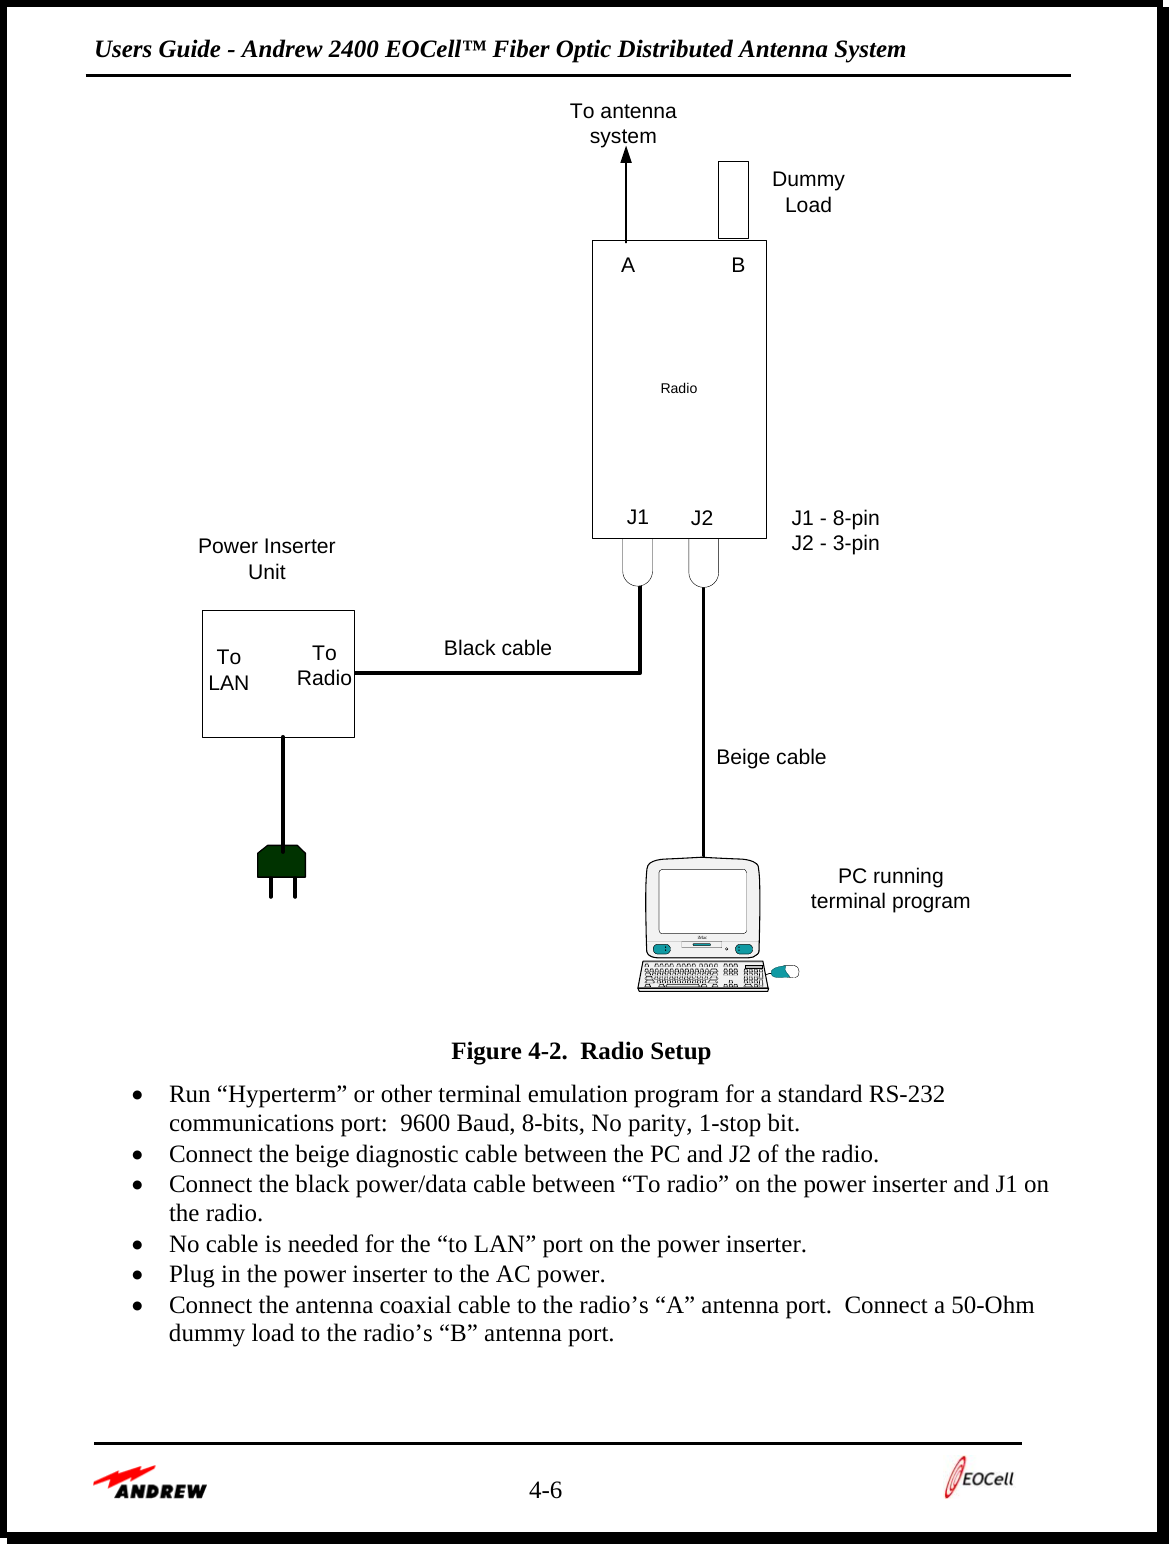 Users Guide - Andrew 2400 EOCell™ Fiber Optic Distributed Antenna System    4-6    RadioABJ1 J2ToLANToRadioPower InserterUnitDummyLoadTo antennasystemiMacPC runningterminal programJ1 - 8-pinJ2 - 3-pinBlack cableBeige cable  Figure 4-2.  Radio Setup • Run “Hyperterm” or other terminal emulation program for a standard RS-232 communications port:  9600 Baud, 8-bits, No parity, 1-stop bit. • Connect the beige diagnostic cable between the PC and J2 of the radio.   • Connect the black power/data cable between “To radio” on the power inserter and J1 on the radio.   • No cable is needed for the “to LAN” port on the power inserter. • Plug in the power inserter to the AC power. • Connect the antenna coaxial cable to the radio’s “A” antenna port.  Connect a 50-Ohm dummy load to the radio’s “B” antenna port.  